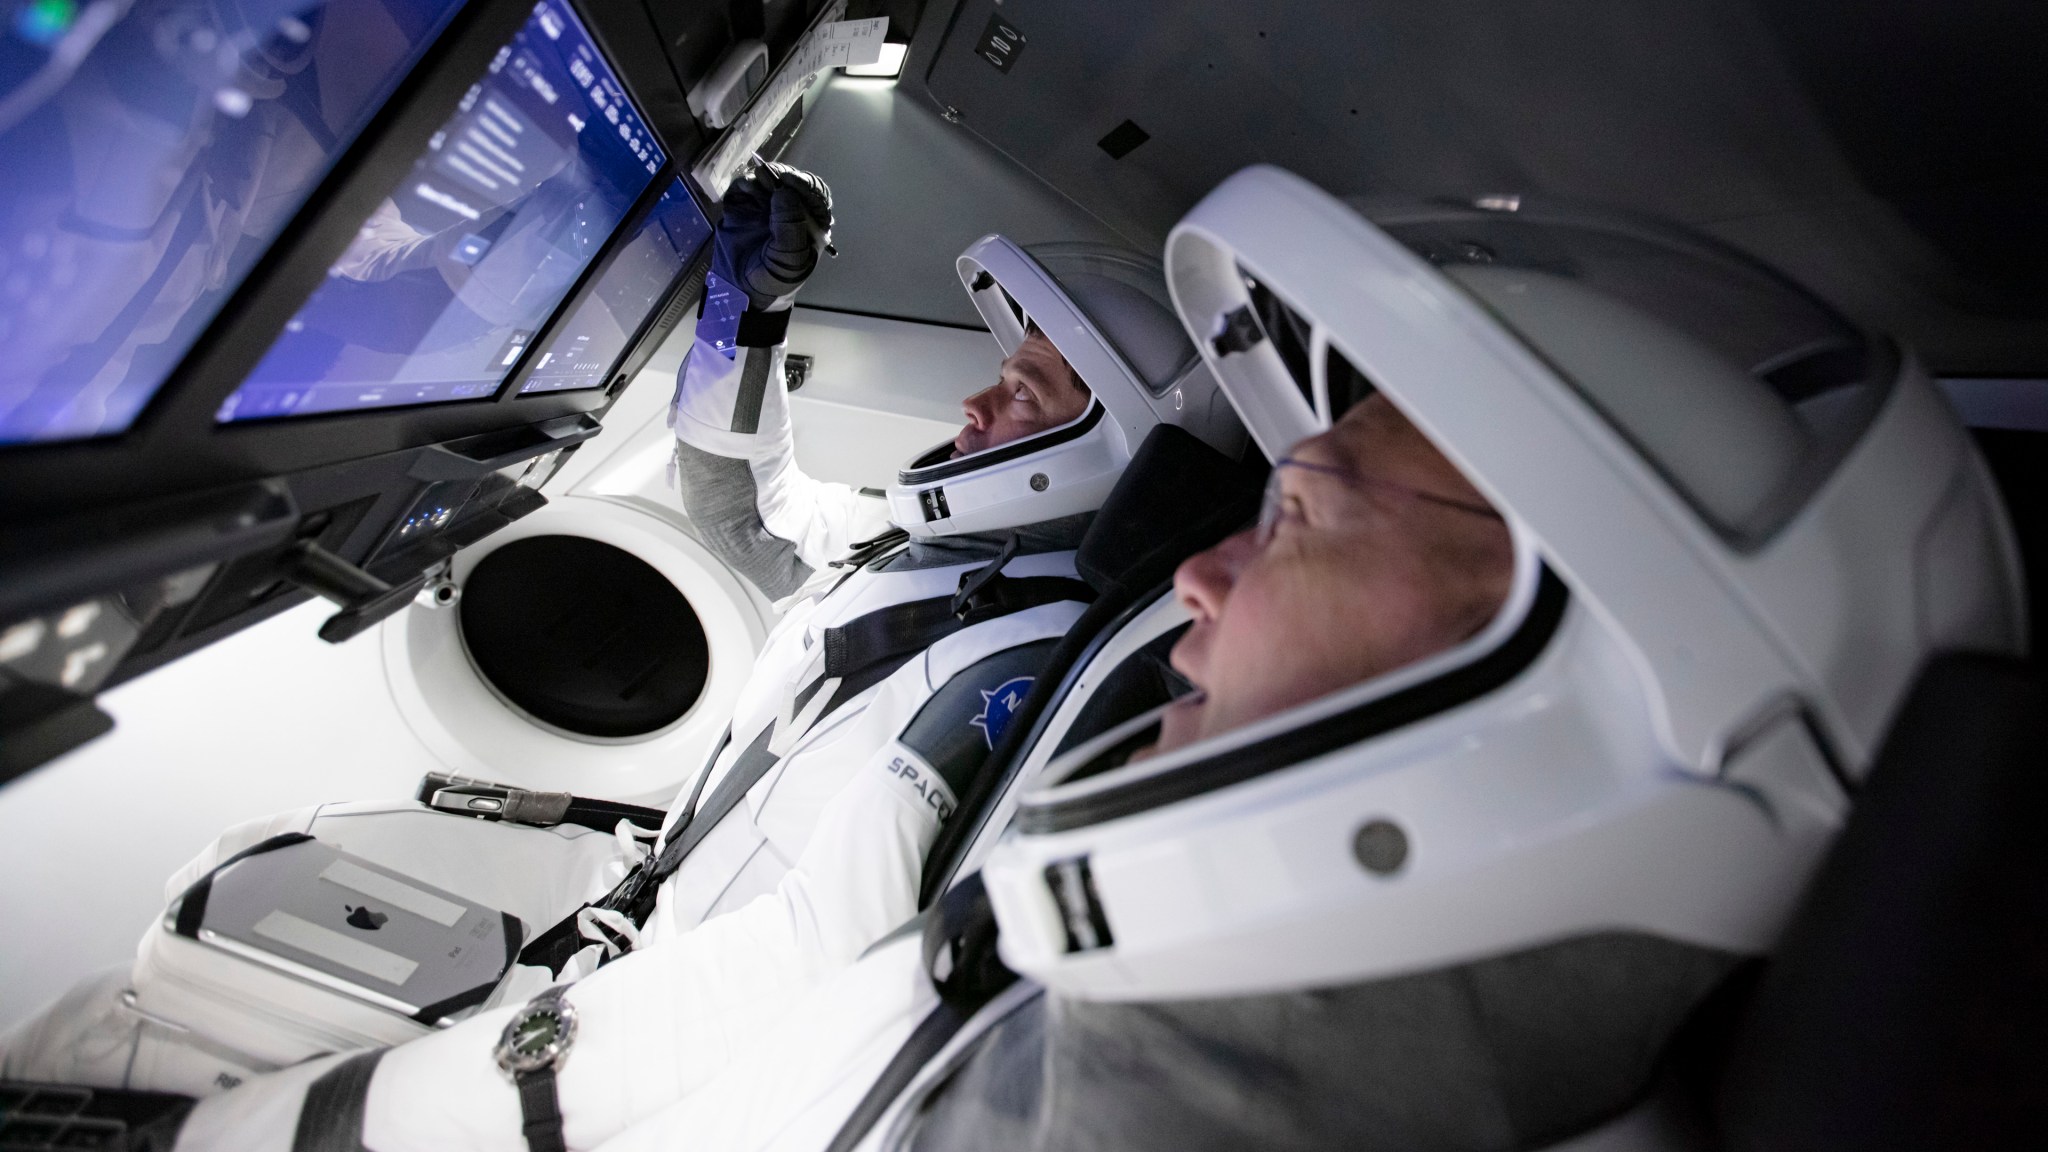 Teams practice a full simulation of launching and docking SpaceX's Crew Dragon spacecraft with astronauts. 